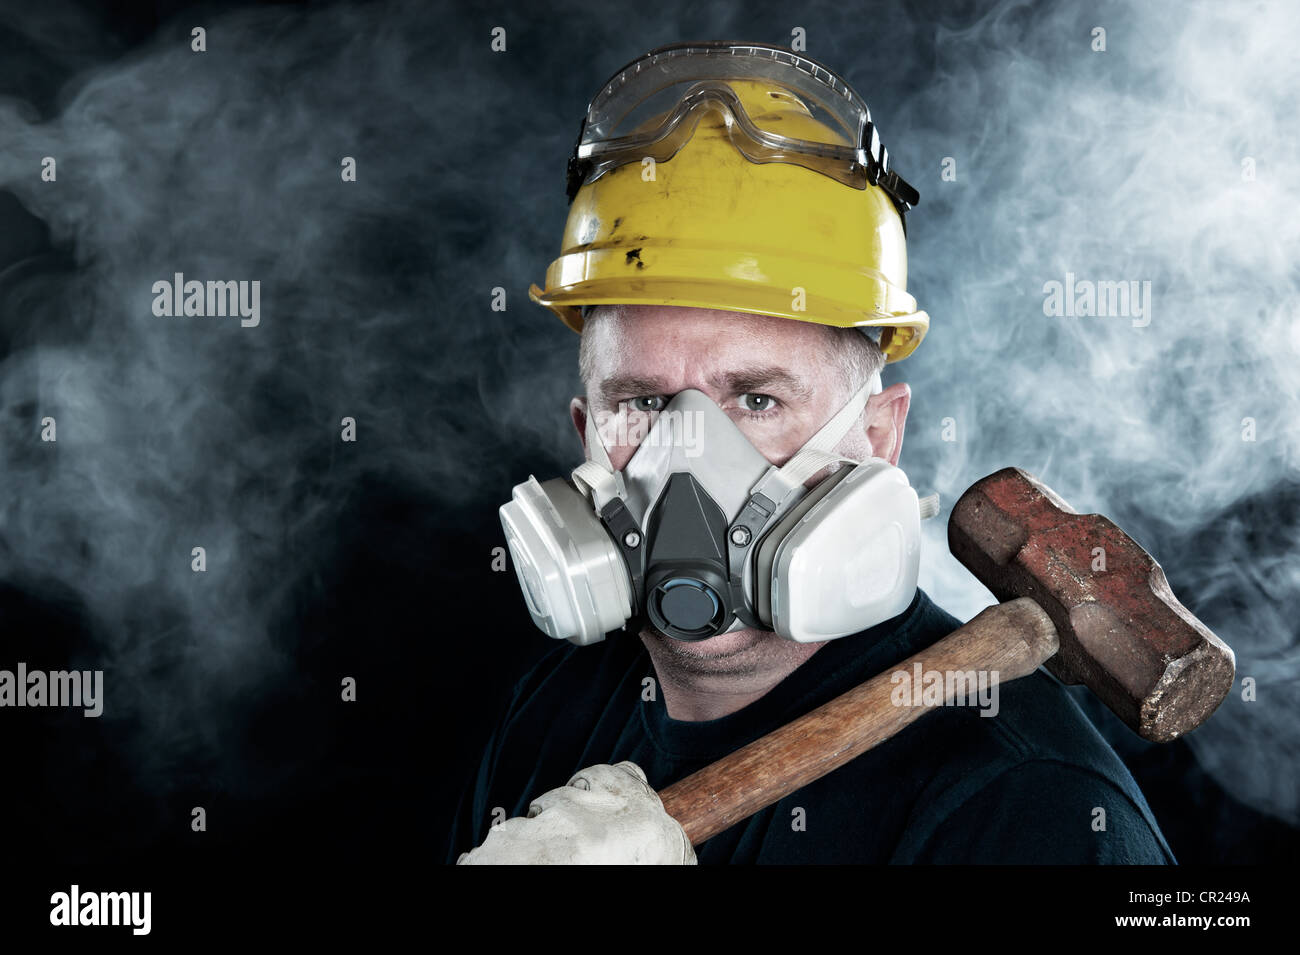 A rescue worker wears a respirator in a smoky, toxic atmosphere carrying a sledgehammer. Stock Photo